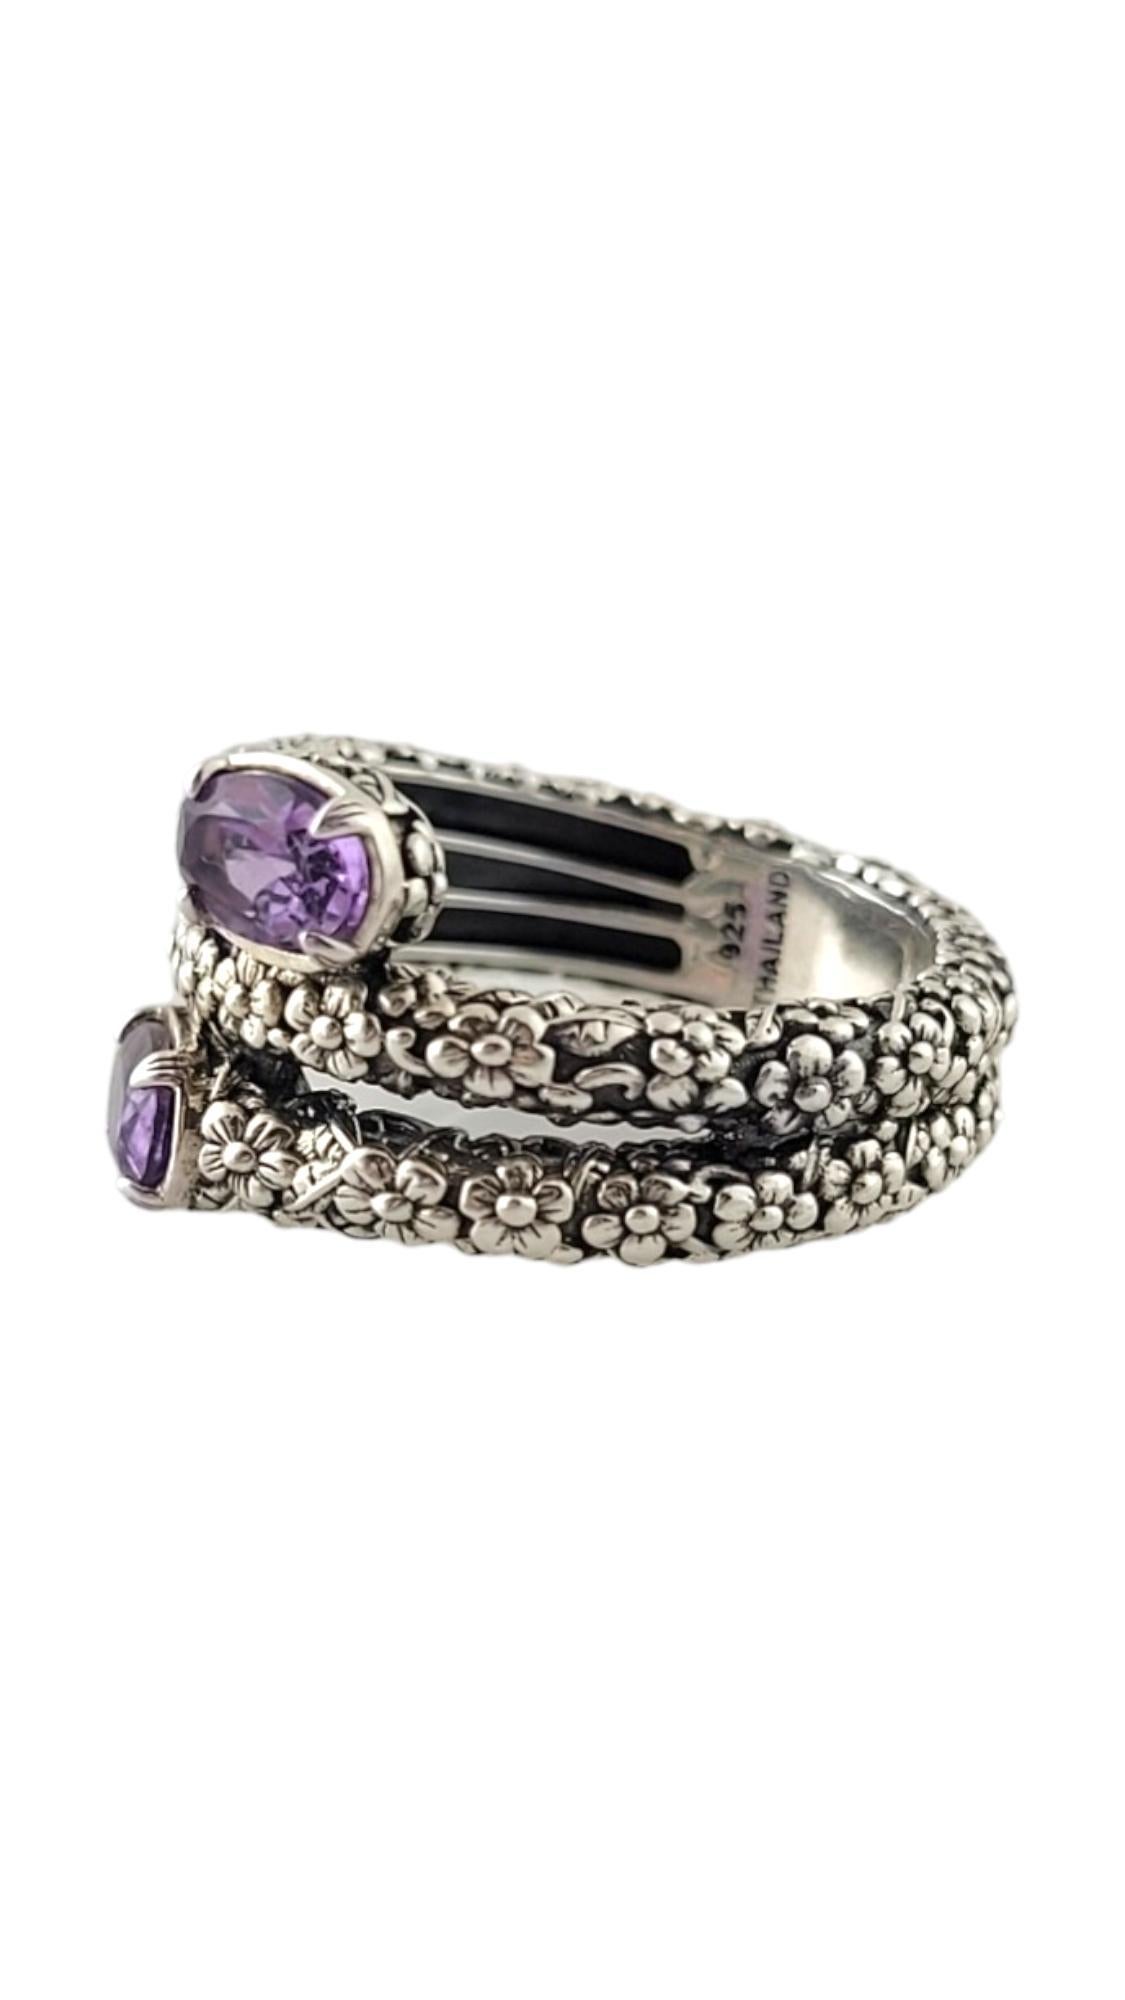 John Hardy JAi Sterling Silver Coil Amethyst Ring Size 6.25

This gorgeous soil ring by John Hardy was mediculously crafted from sterling silver and is decorated with 2 beautiful amethyst stones!

Ring size: 6.25
Shank: 5.68mm

Weight: 3.74 dwt/